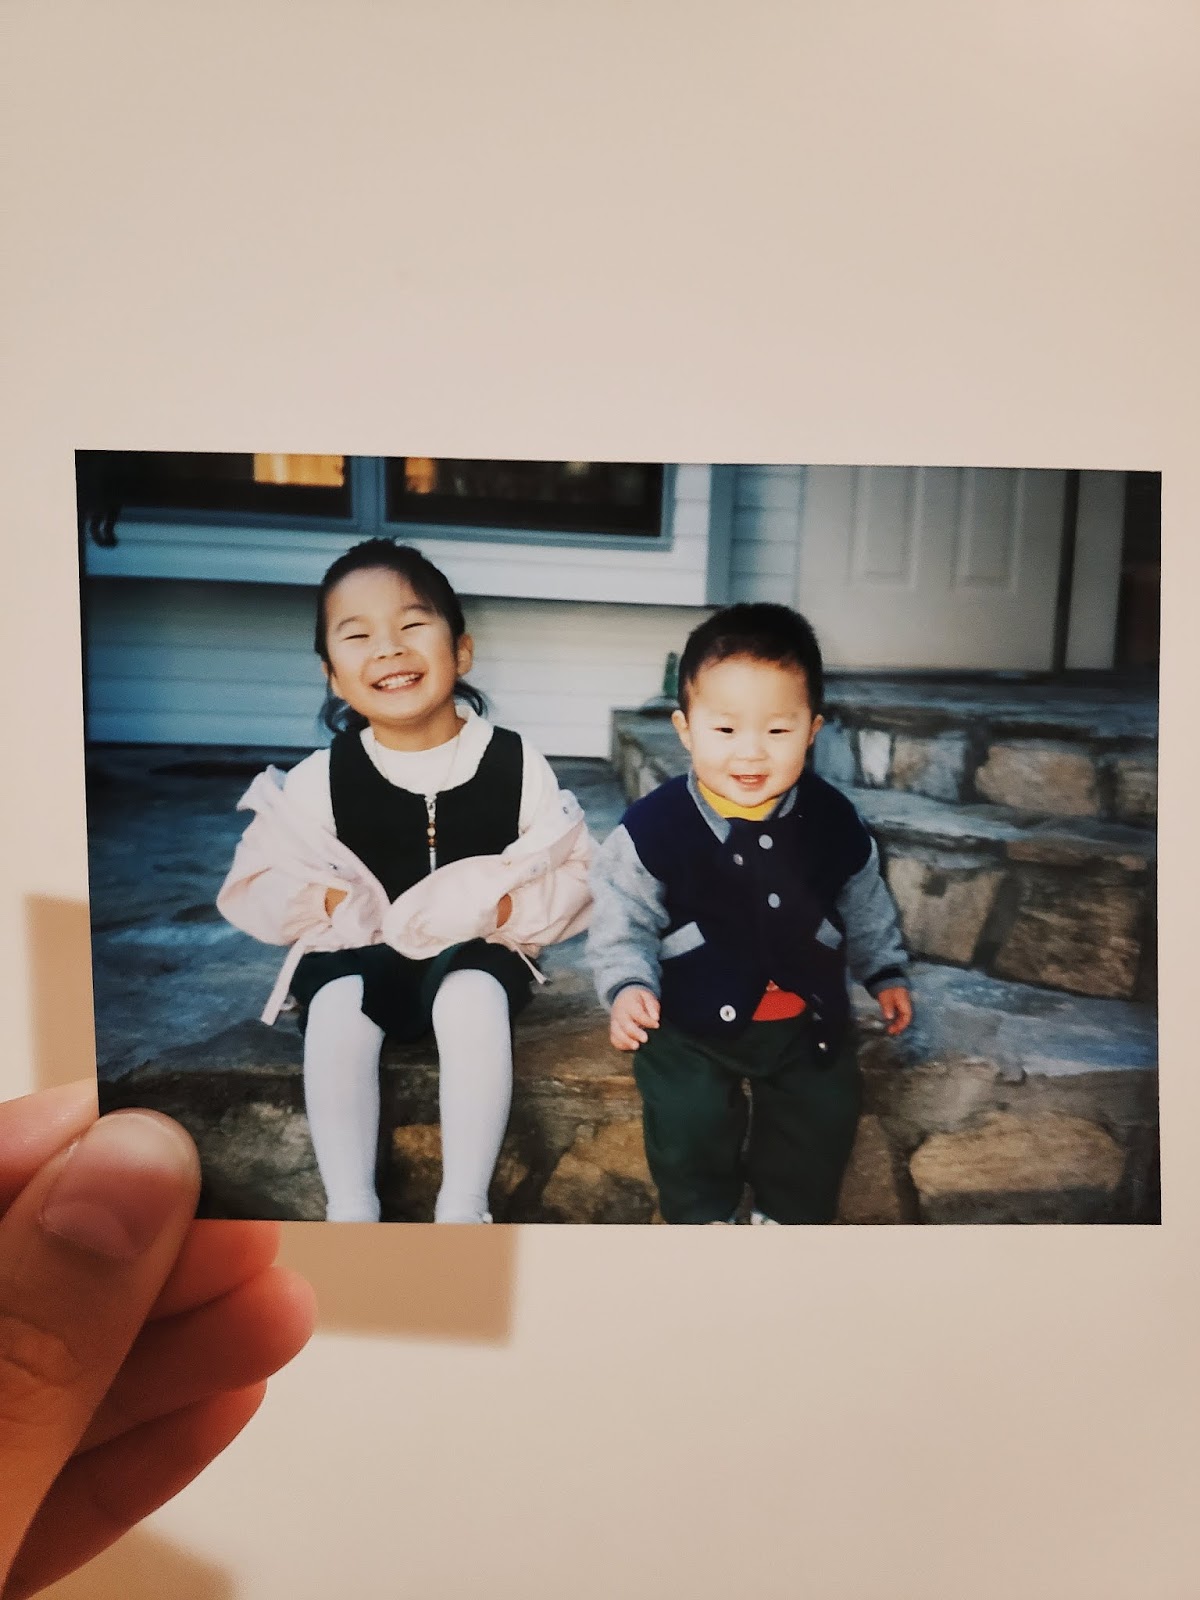 Growing up Asian in America - The cultural Limbo | Asian-American